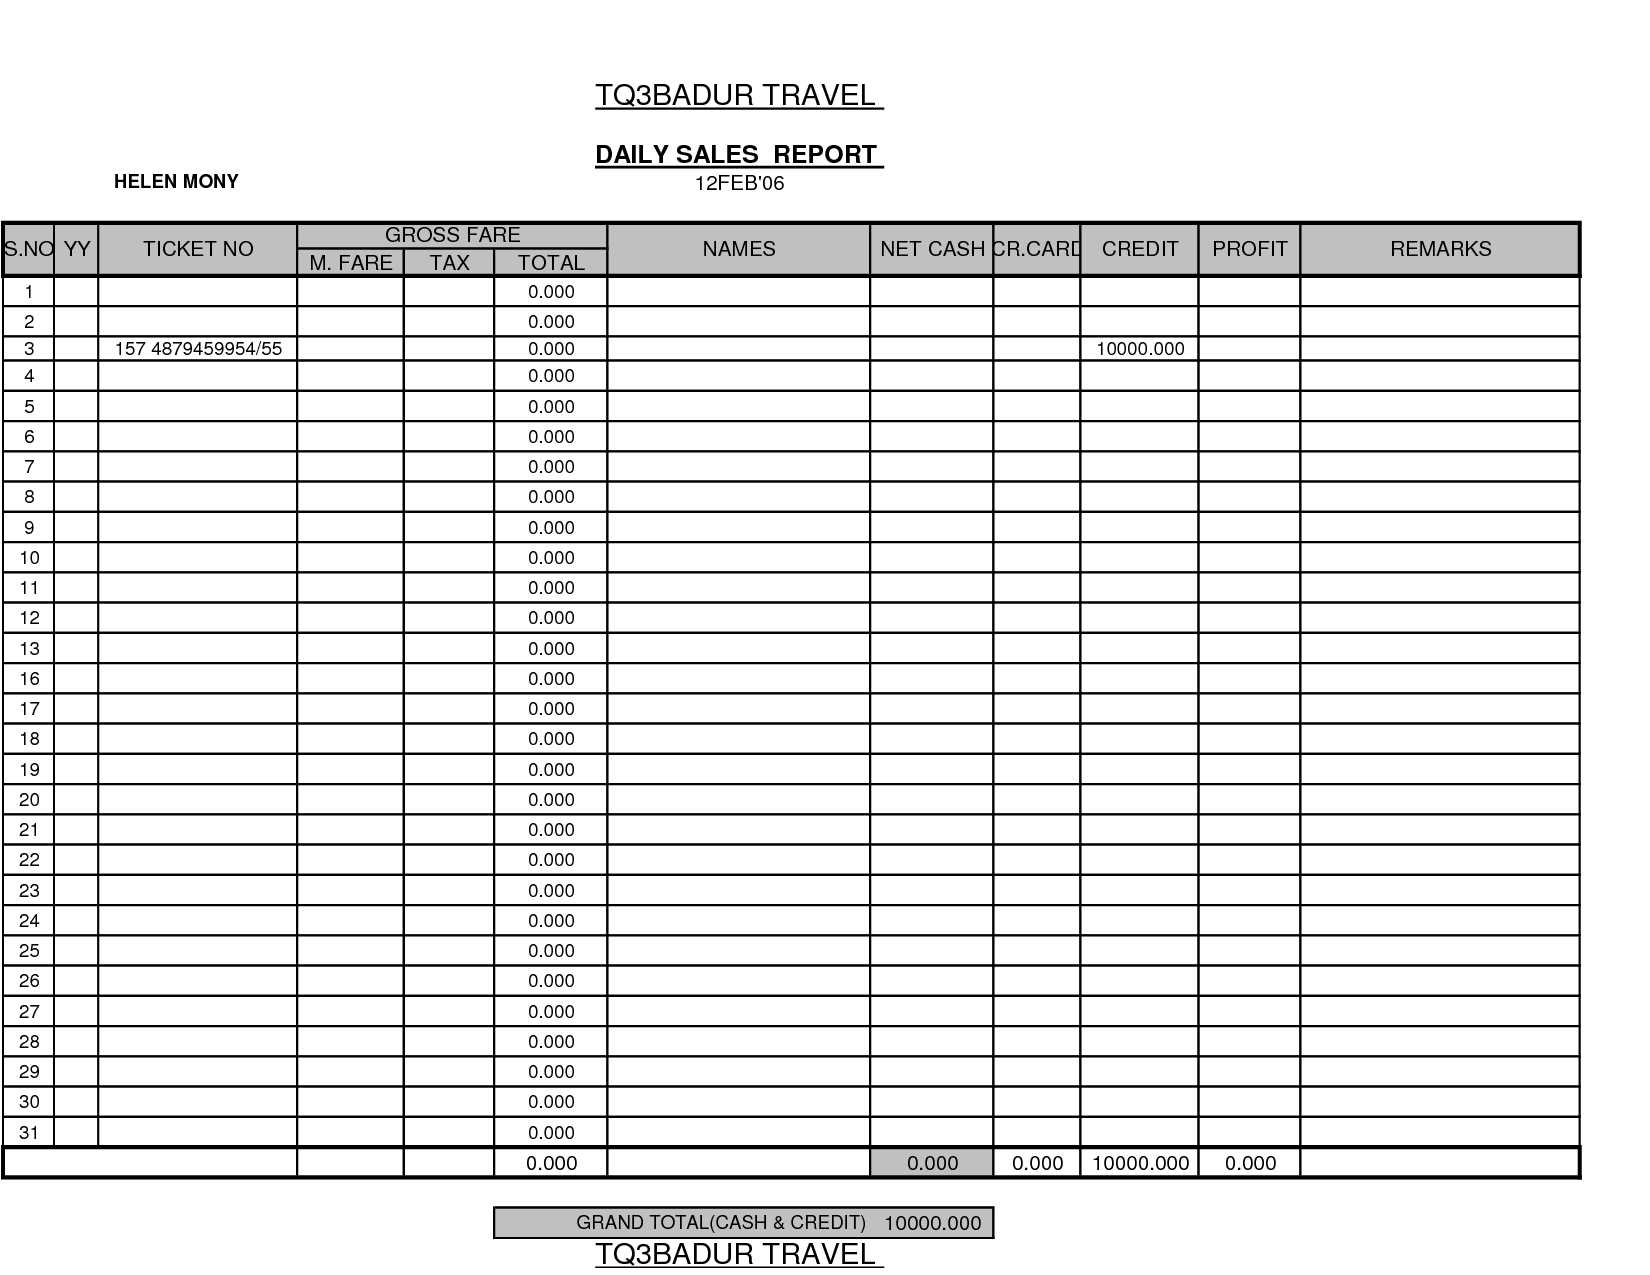 Daily Sales Report Template Examples Retail Restaurant Pertaining To Free Daily Sales Report Excel Template